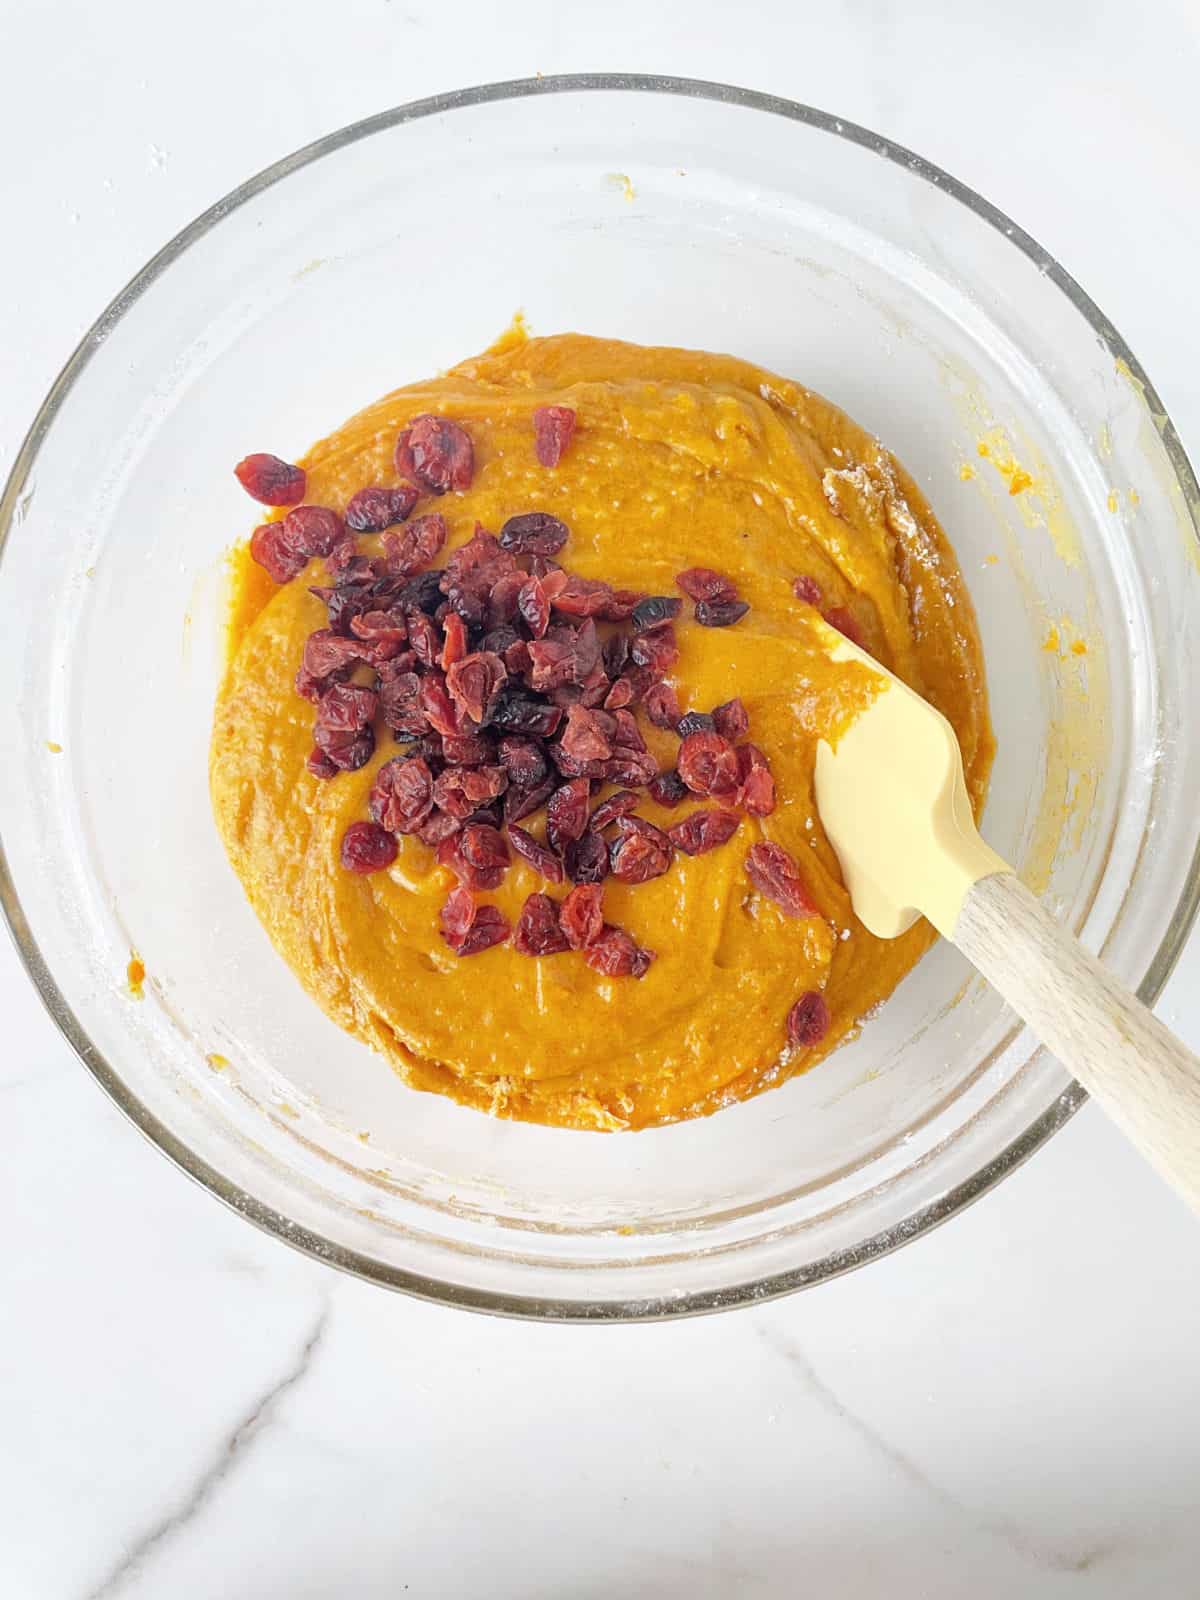 Cranberries added to pumpkin muffin batter in a glass bowl with a yellow spatula on a white marble surface.